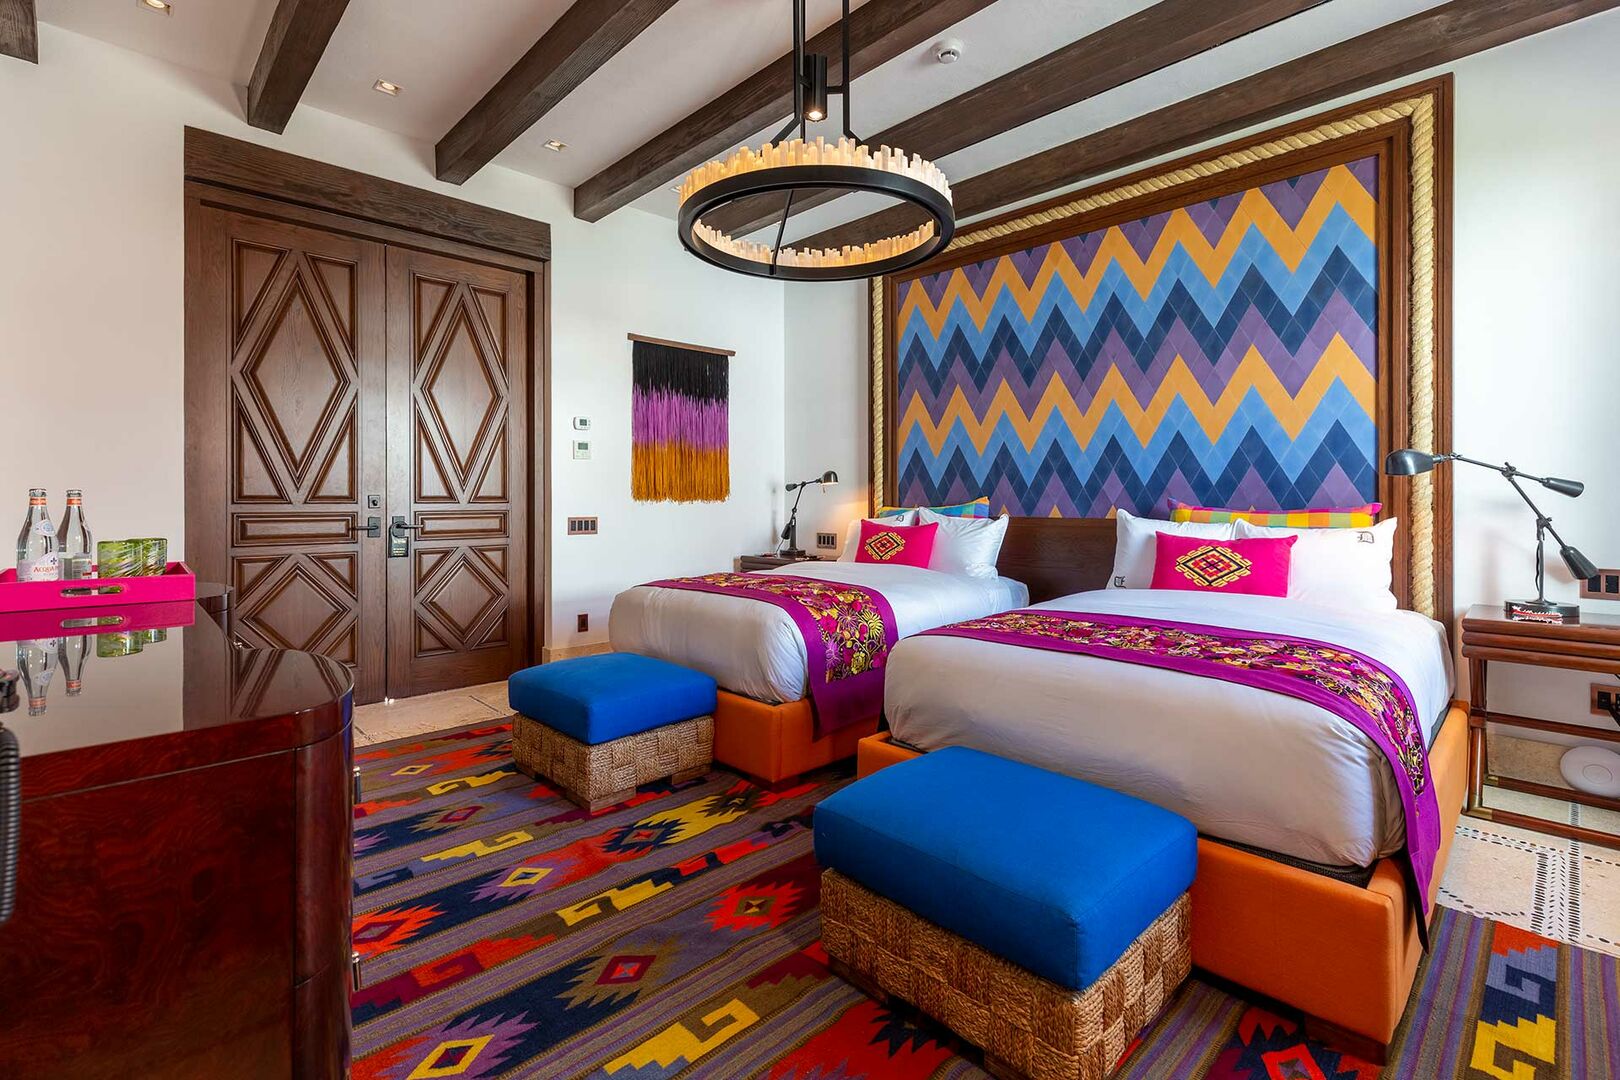 Two beds sit side by side in a bedroom of La Datcha, with colorful bedframes.